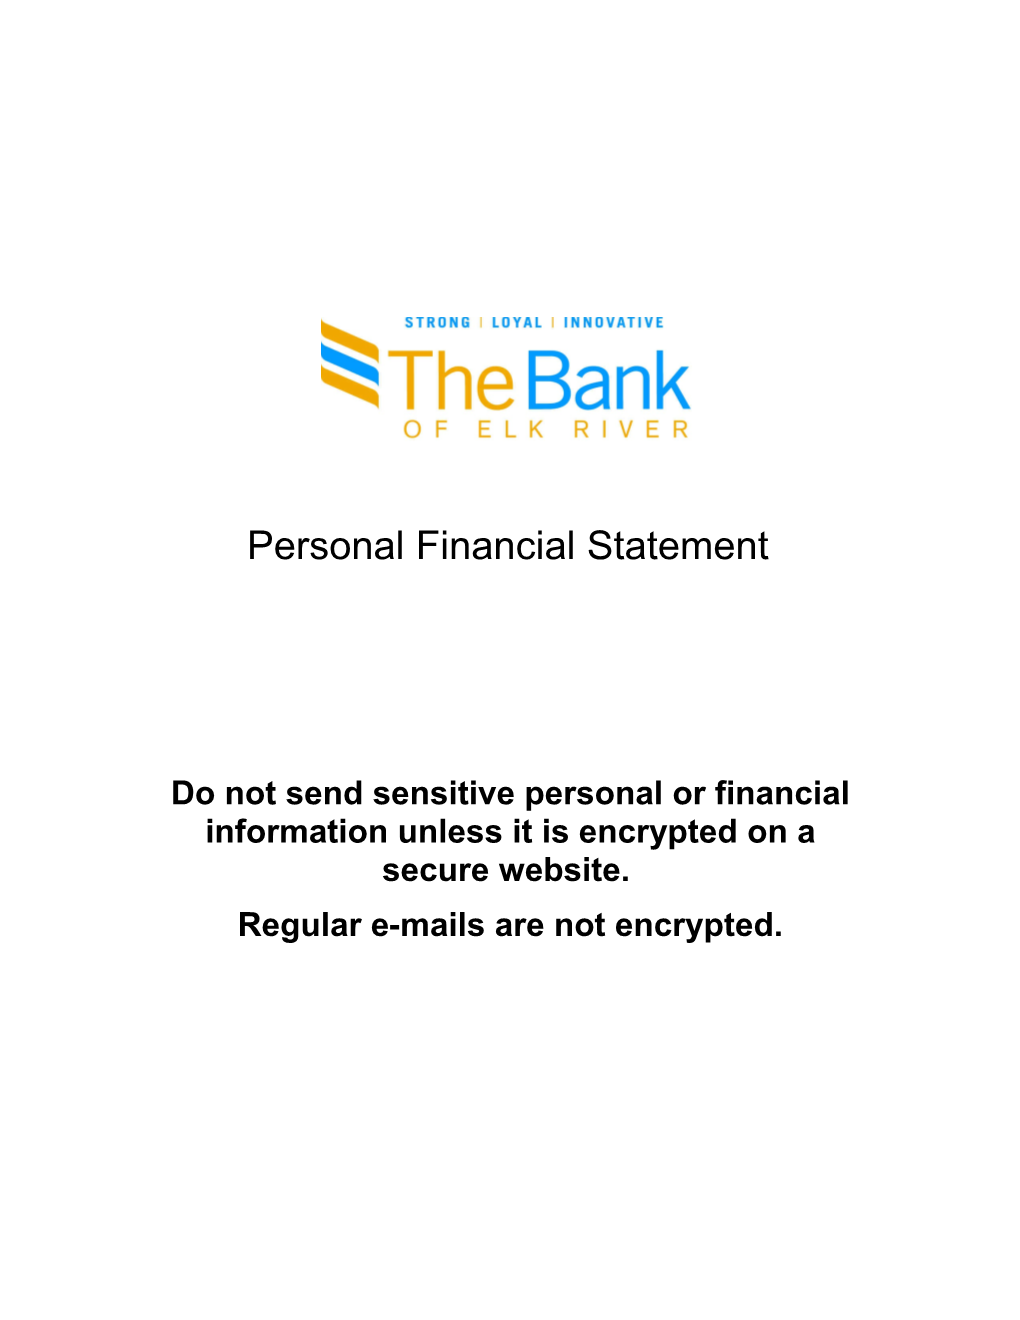 Do Not Send Sensitive Personal Or Financial Information Unless It Is Encrypted on a Secure